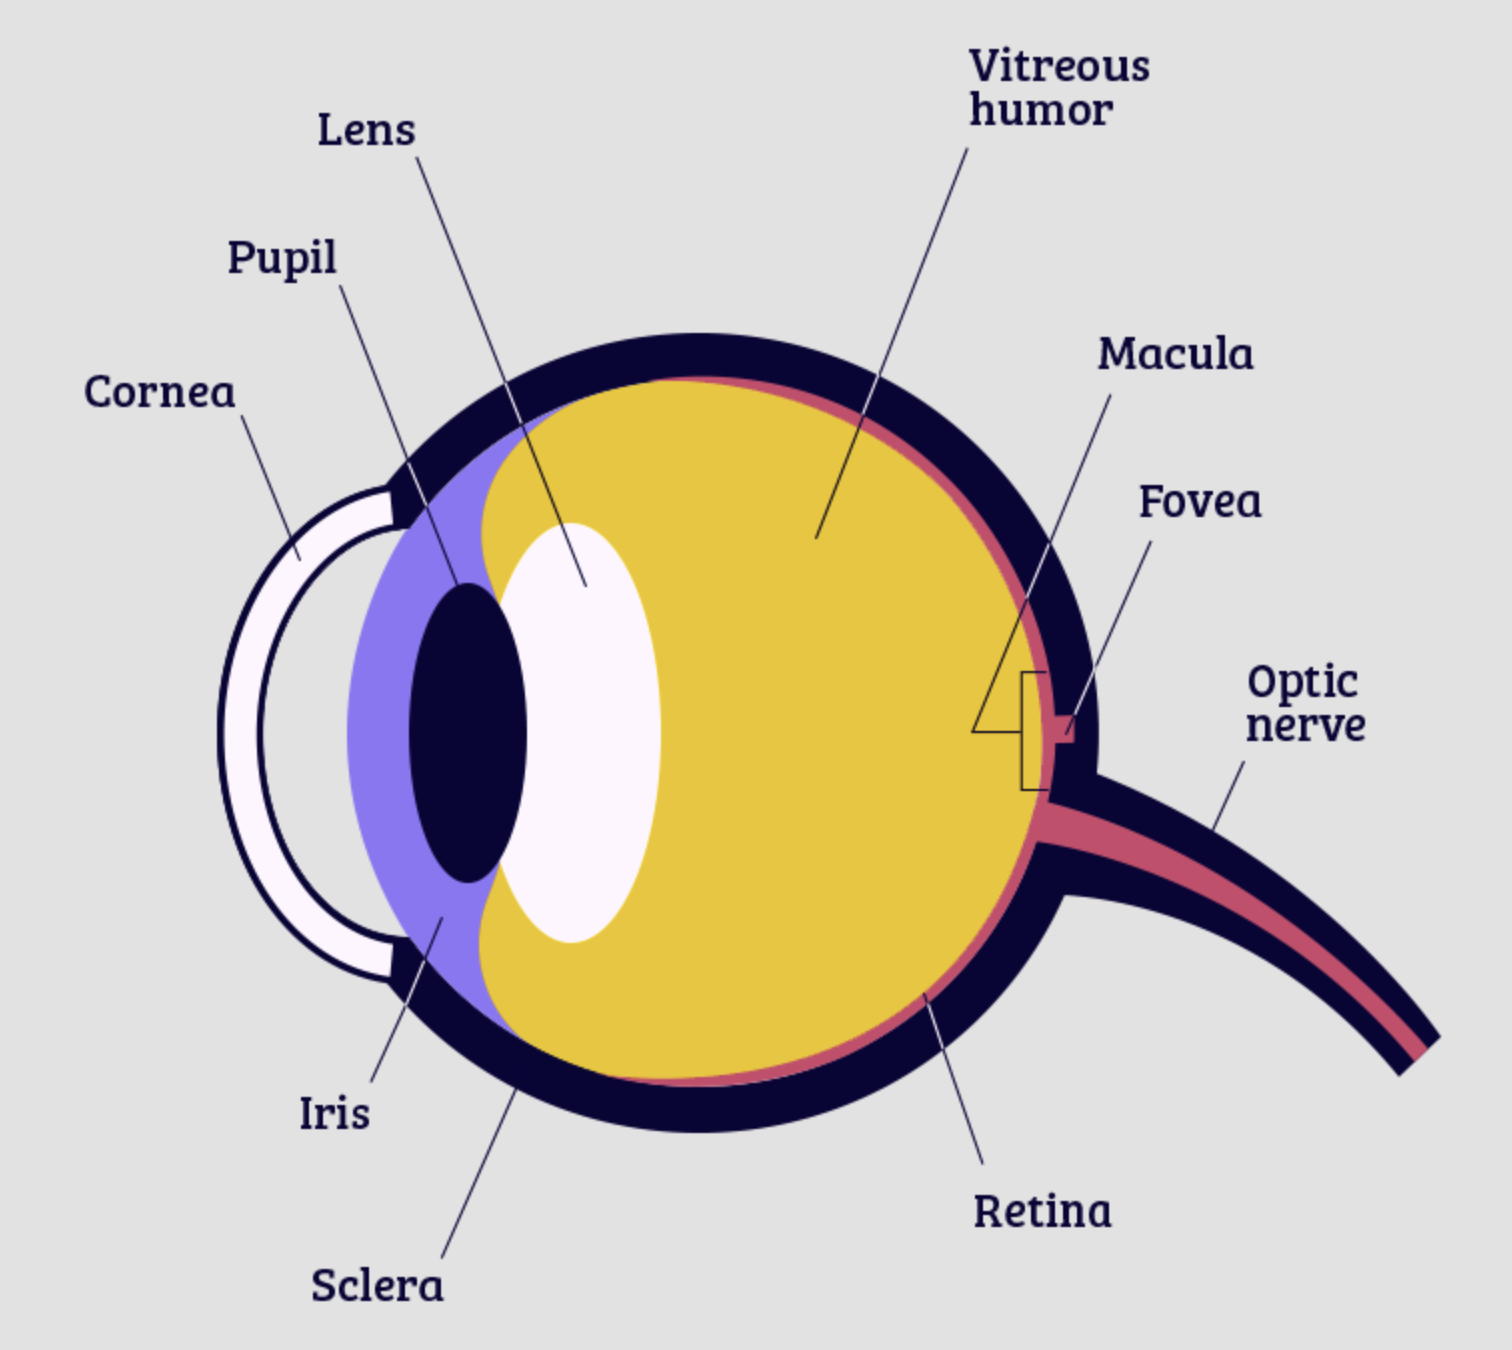 A diagram which points out different parts of the eye including macula, cornea, pupil